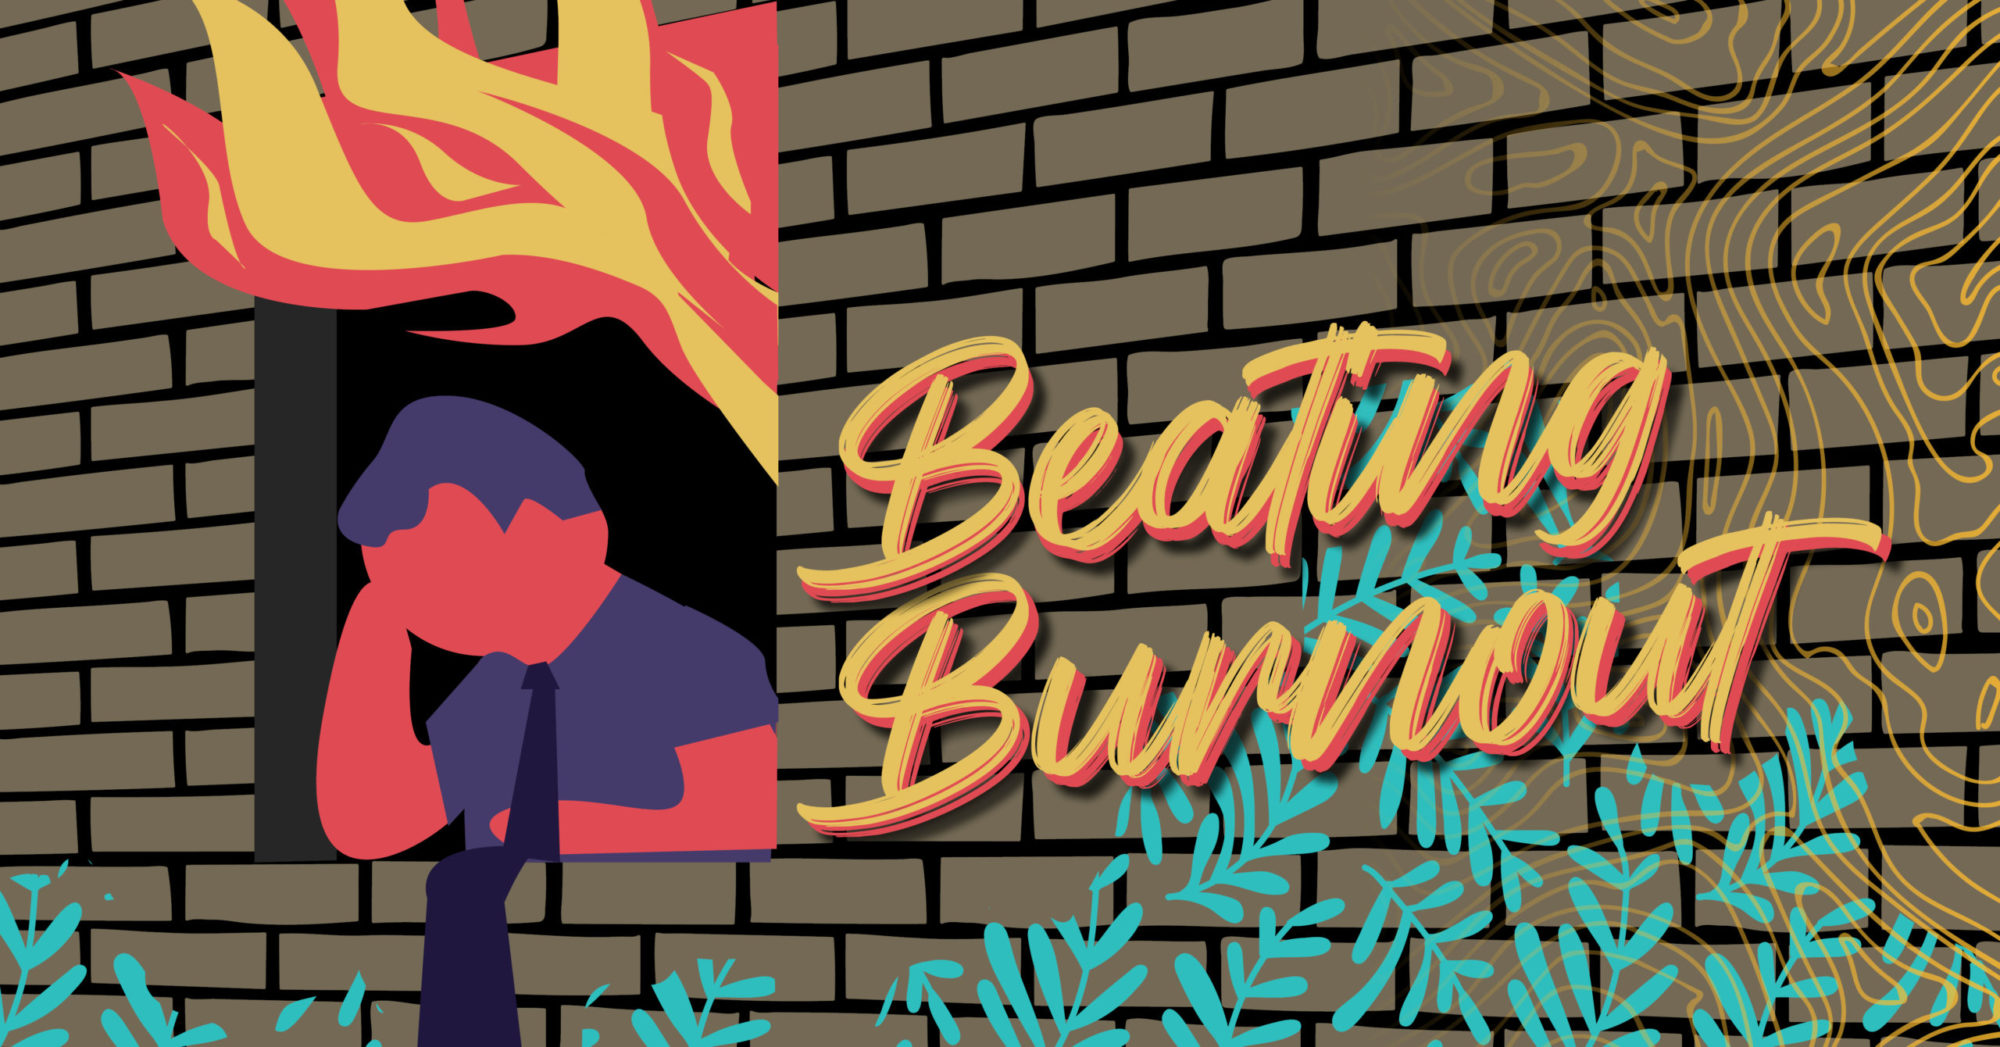 An illustrated figure leaning out of the window of a burning building with the text, "Beating Burnout."